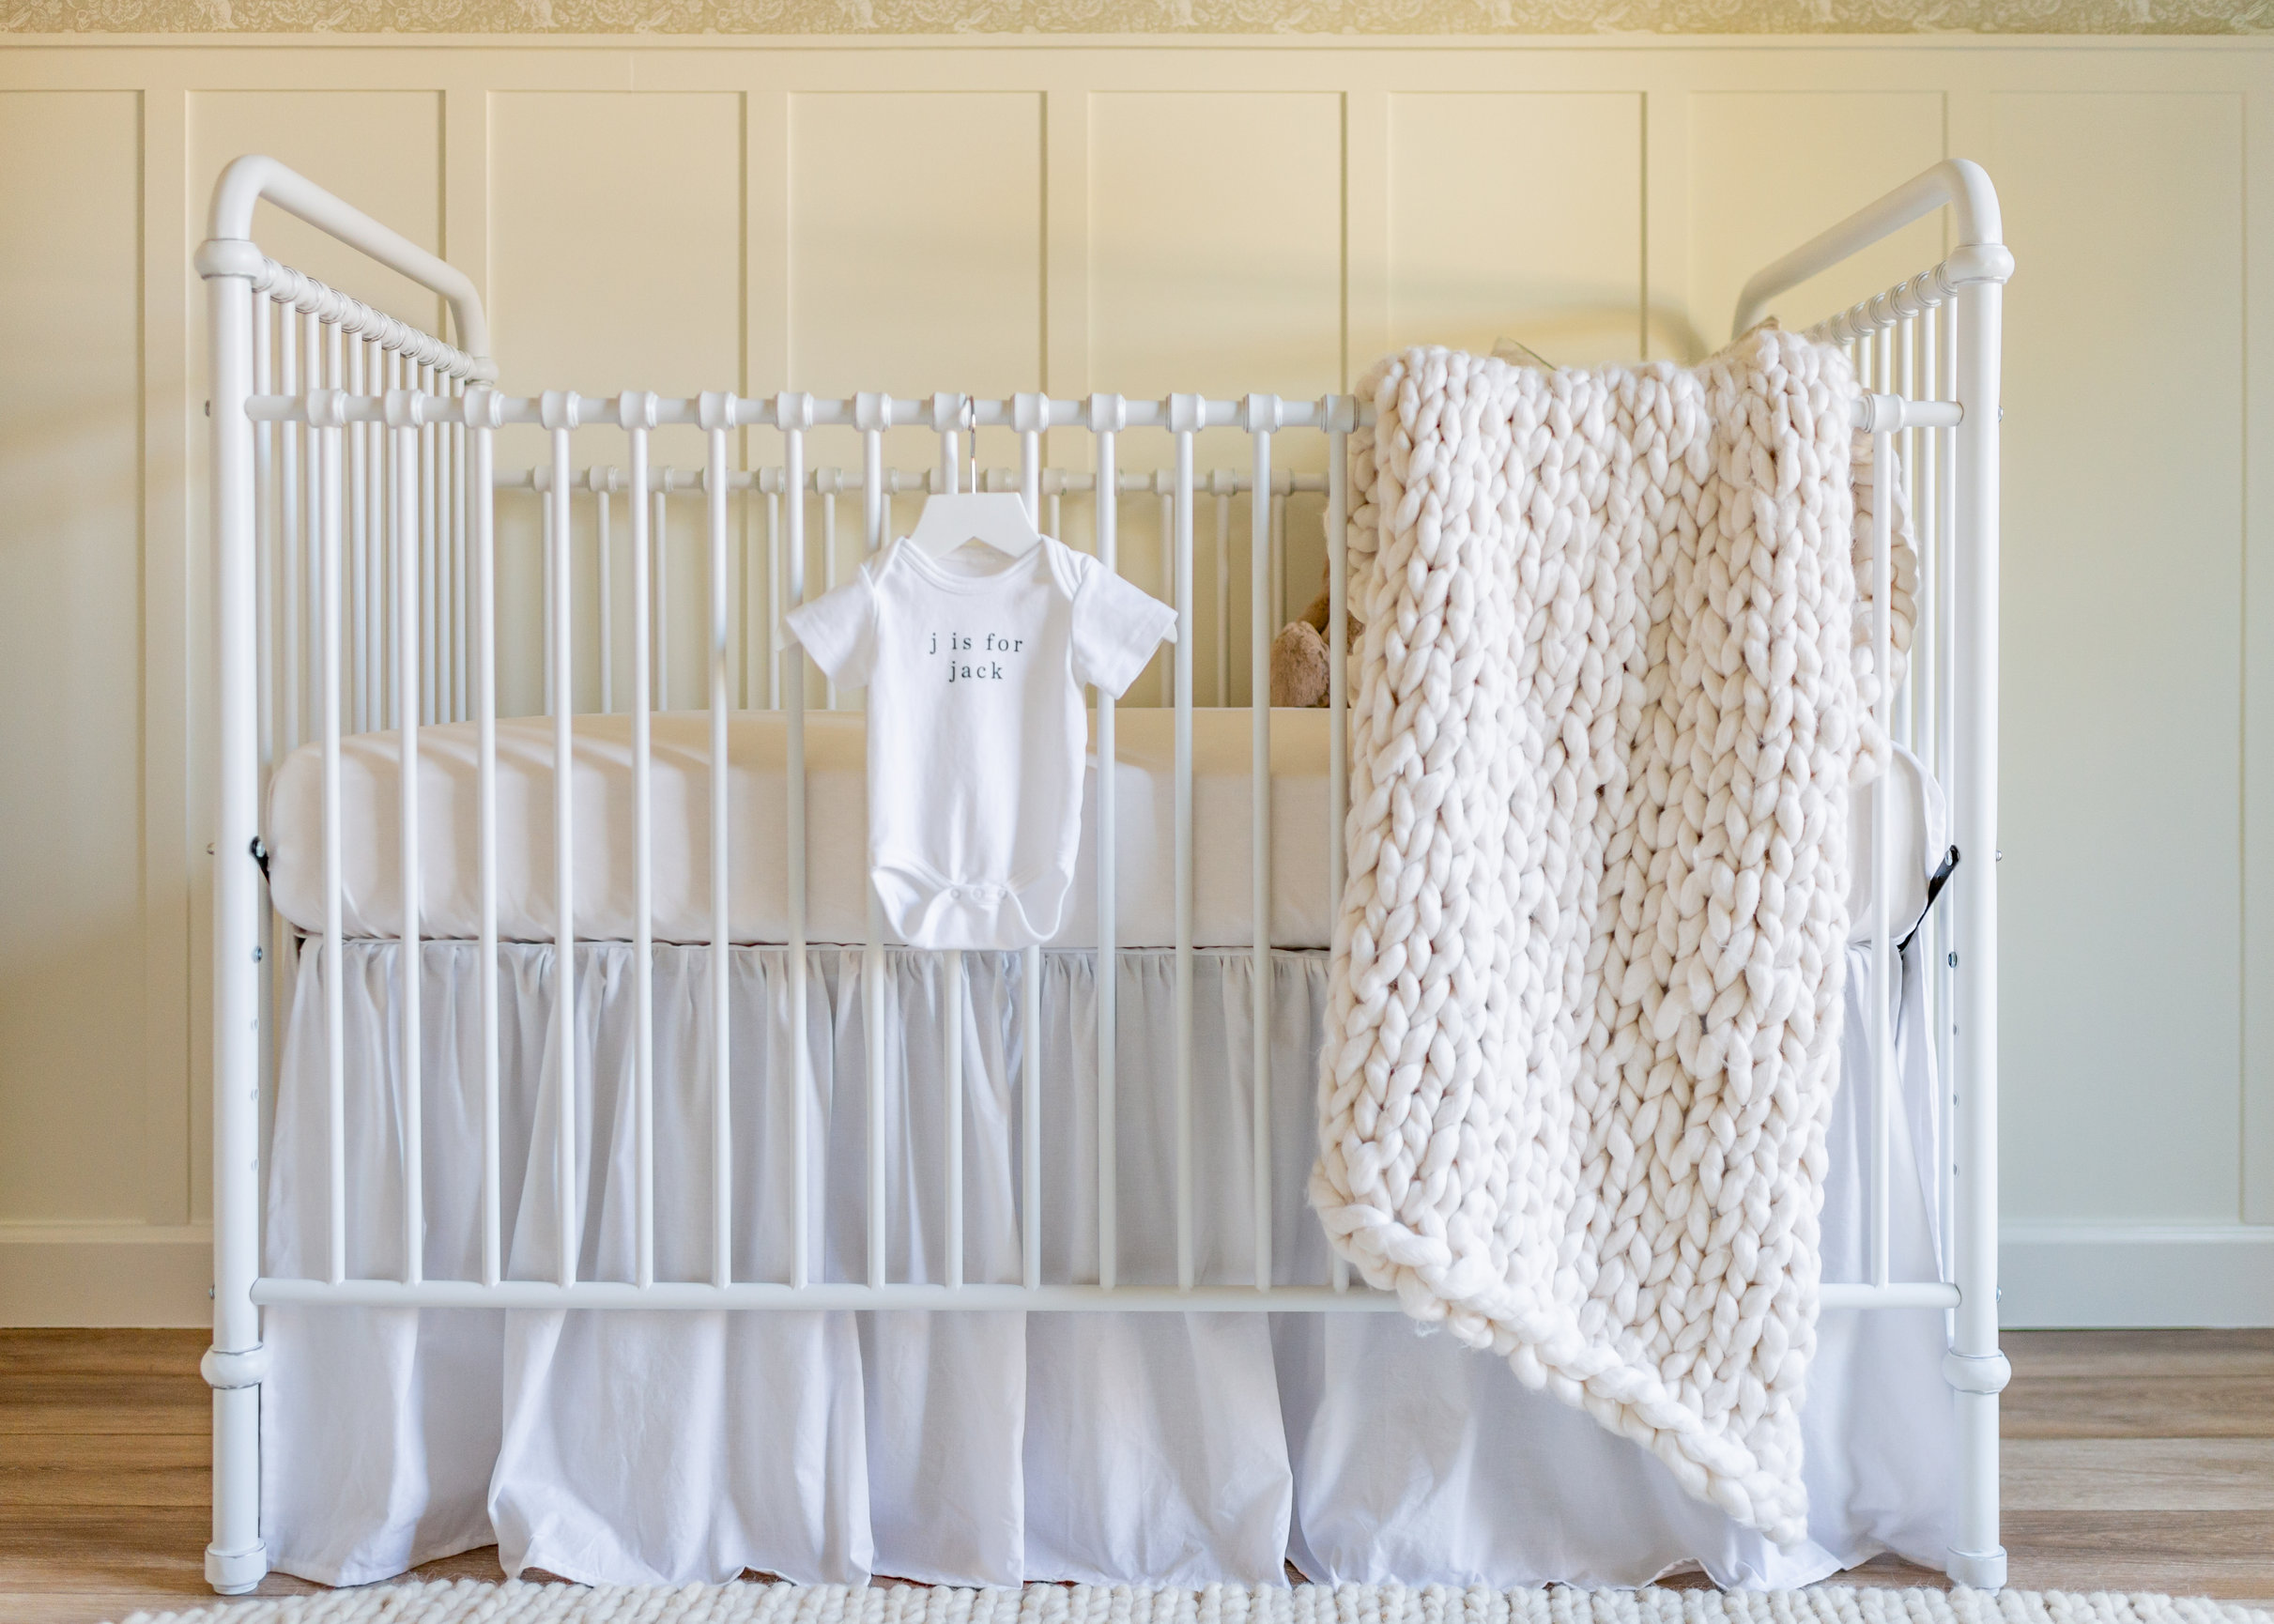 French Country crib, French Country crib bedding, French Country nursery cribs & toddler beds